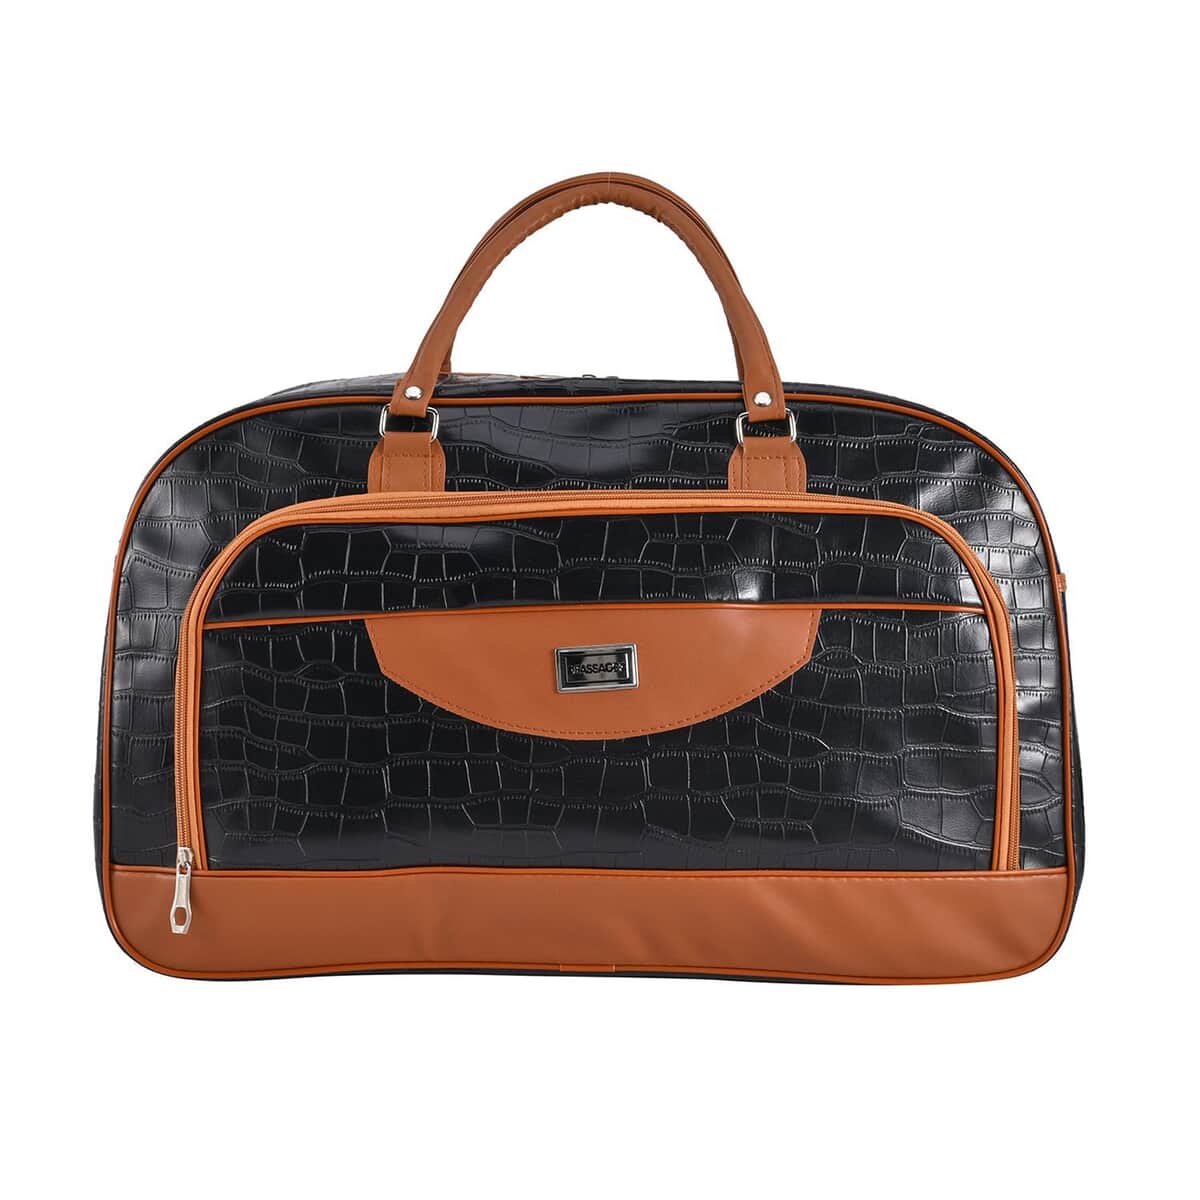 TLV PASSAGE Black Crocodile Embossed Faux Leather Travel Tote Bag (21.65"x8.5"x13.39") with Shoulder Strap image number 0